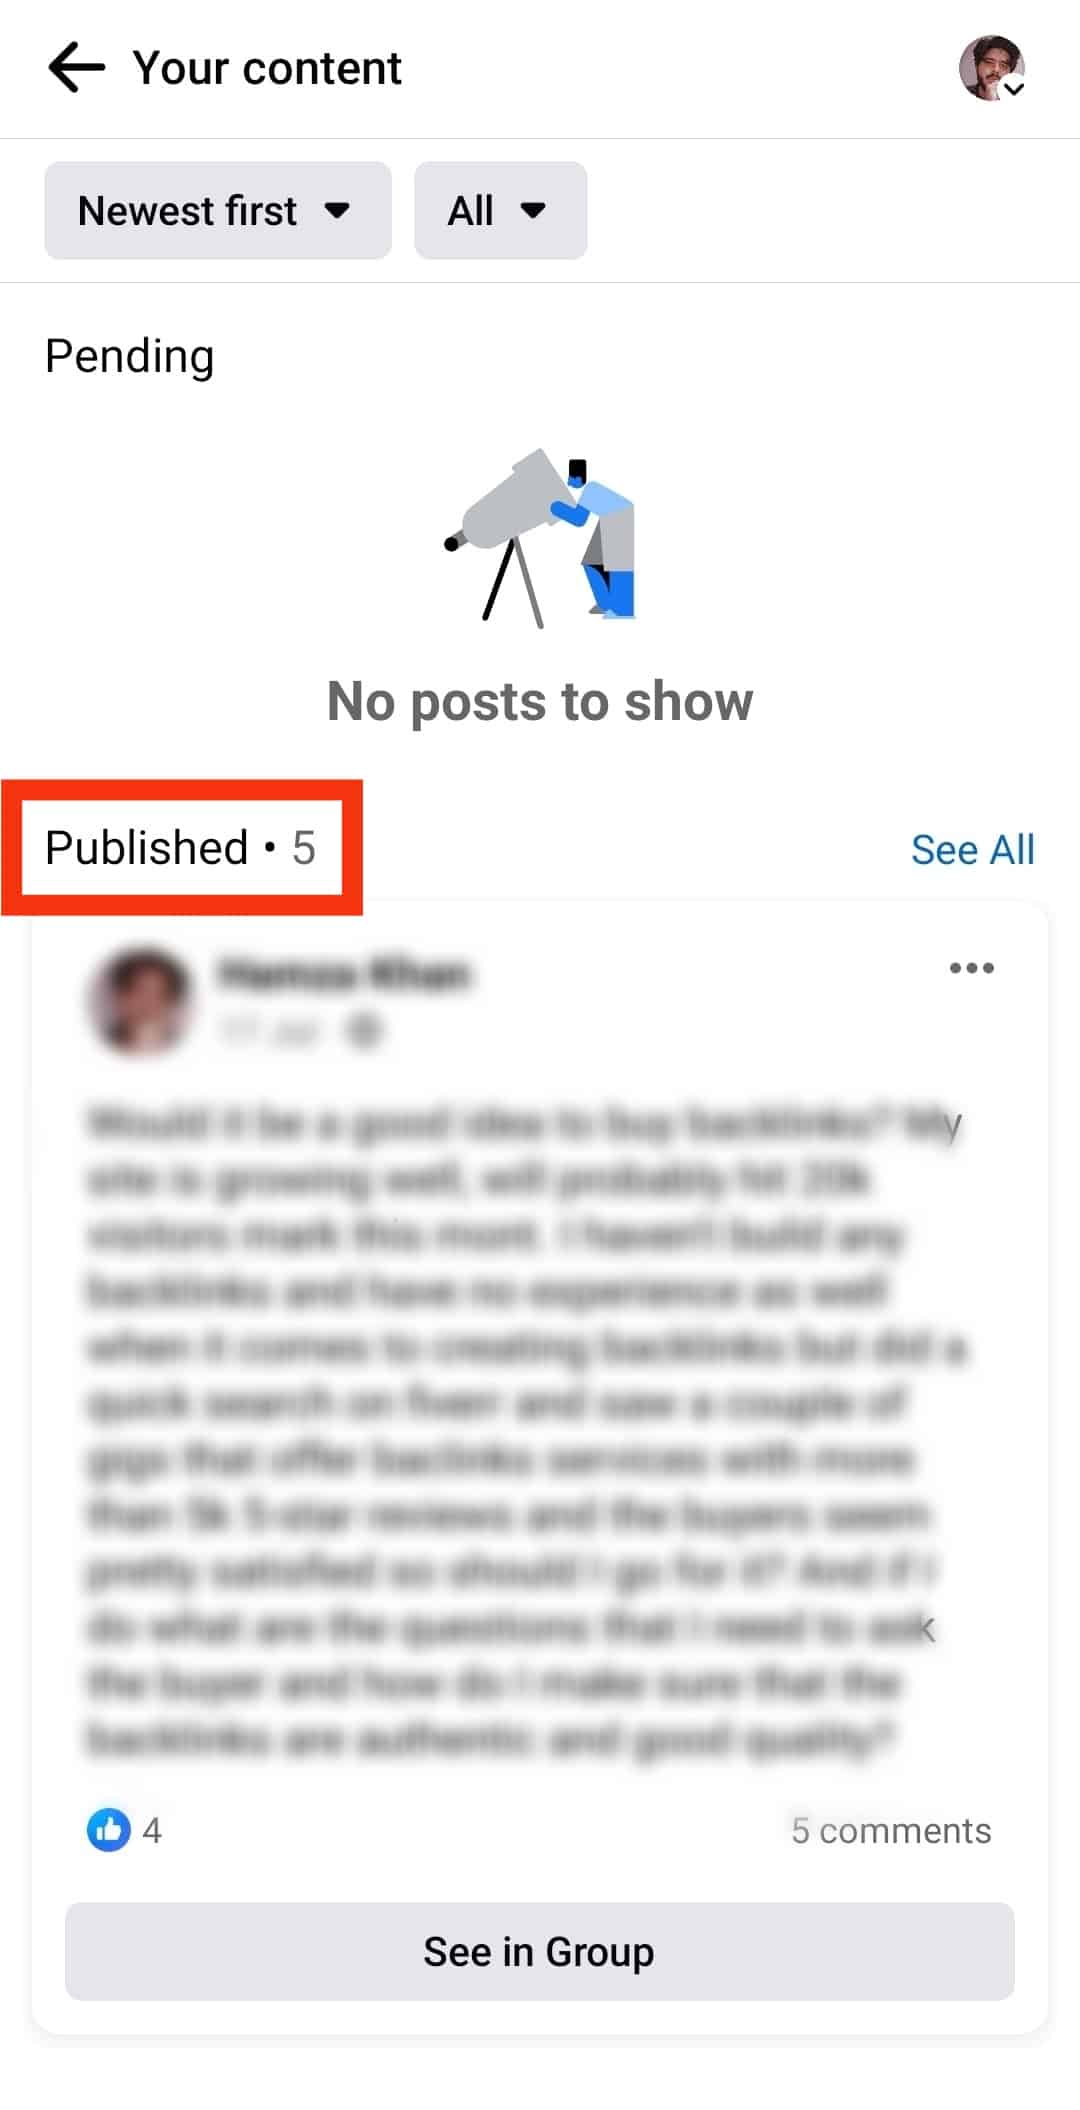 All Your Published Posts Appear In The Published Section